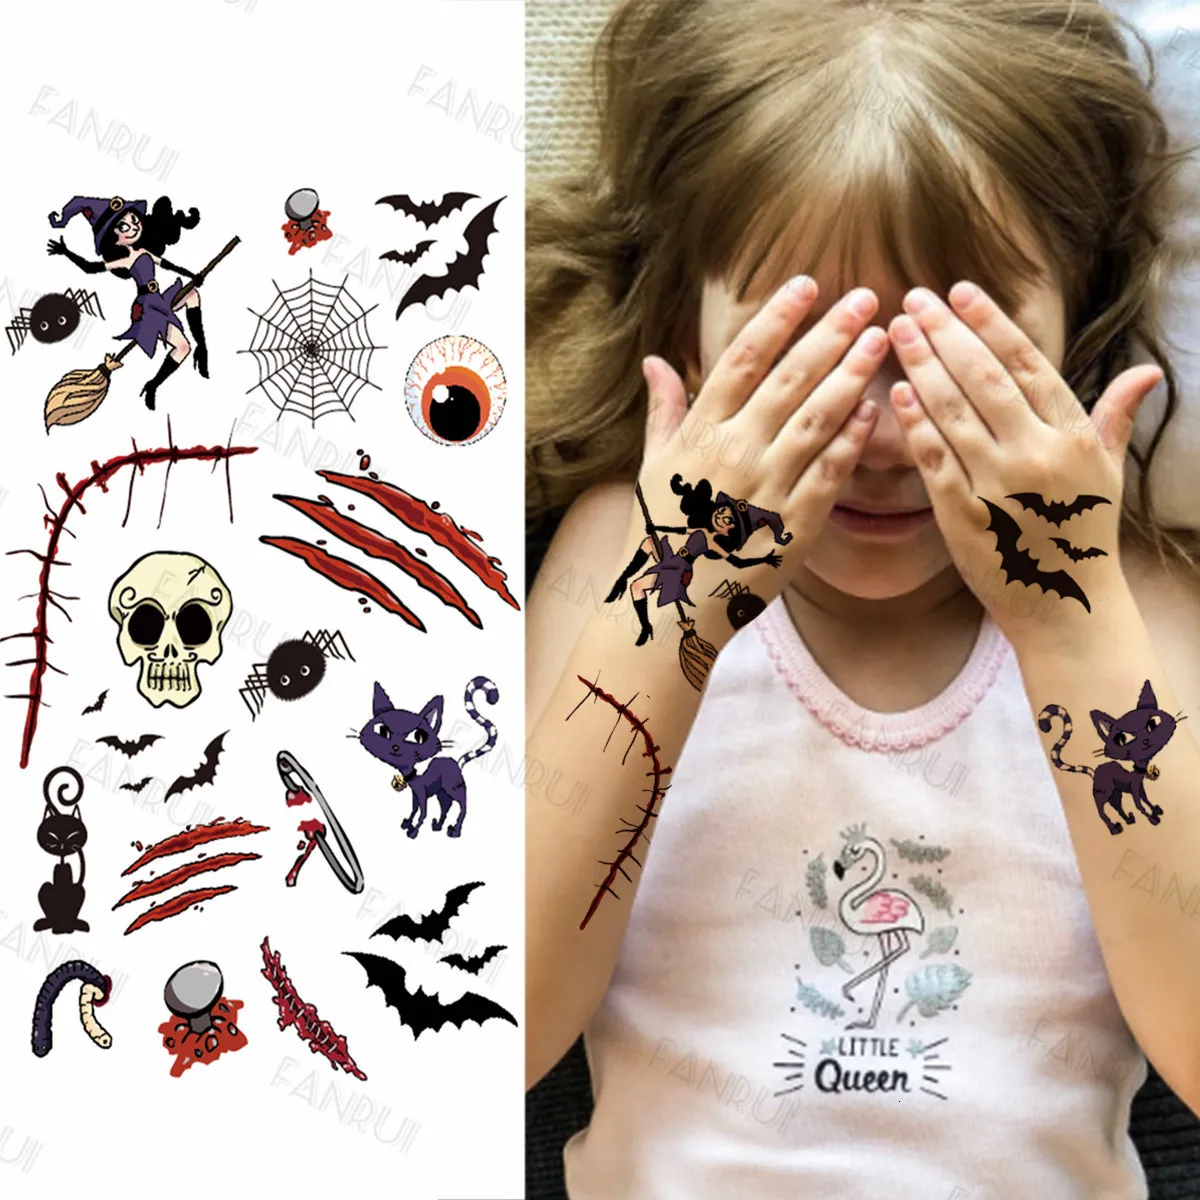 Realistic Black Halloween Spider Halloween Fake Tattoos For Kids DIY Small  Stickers With Scarecrow And Skull Design 230926 From Bian04, $2.94